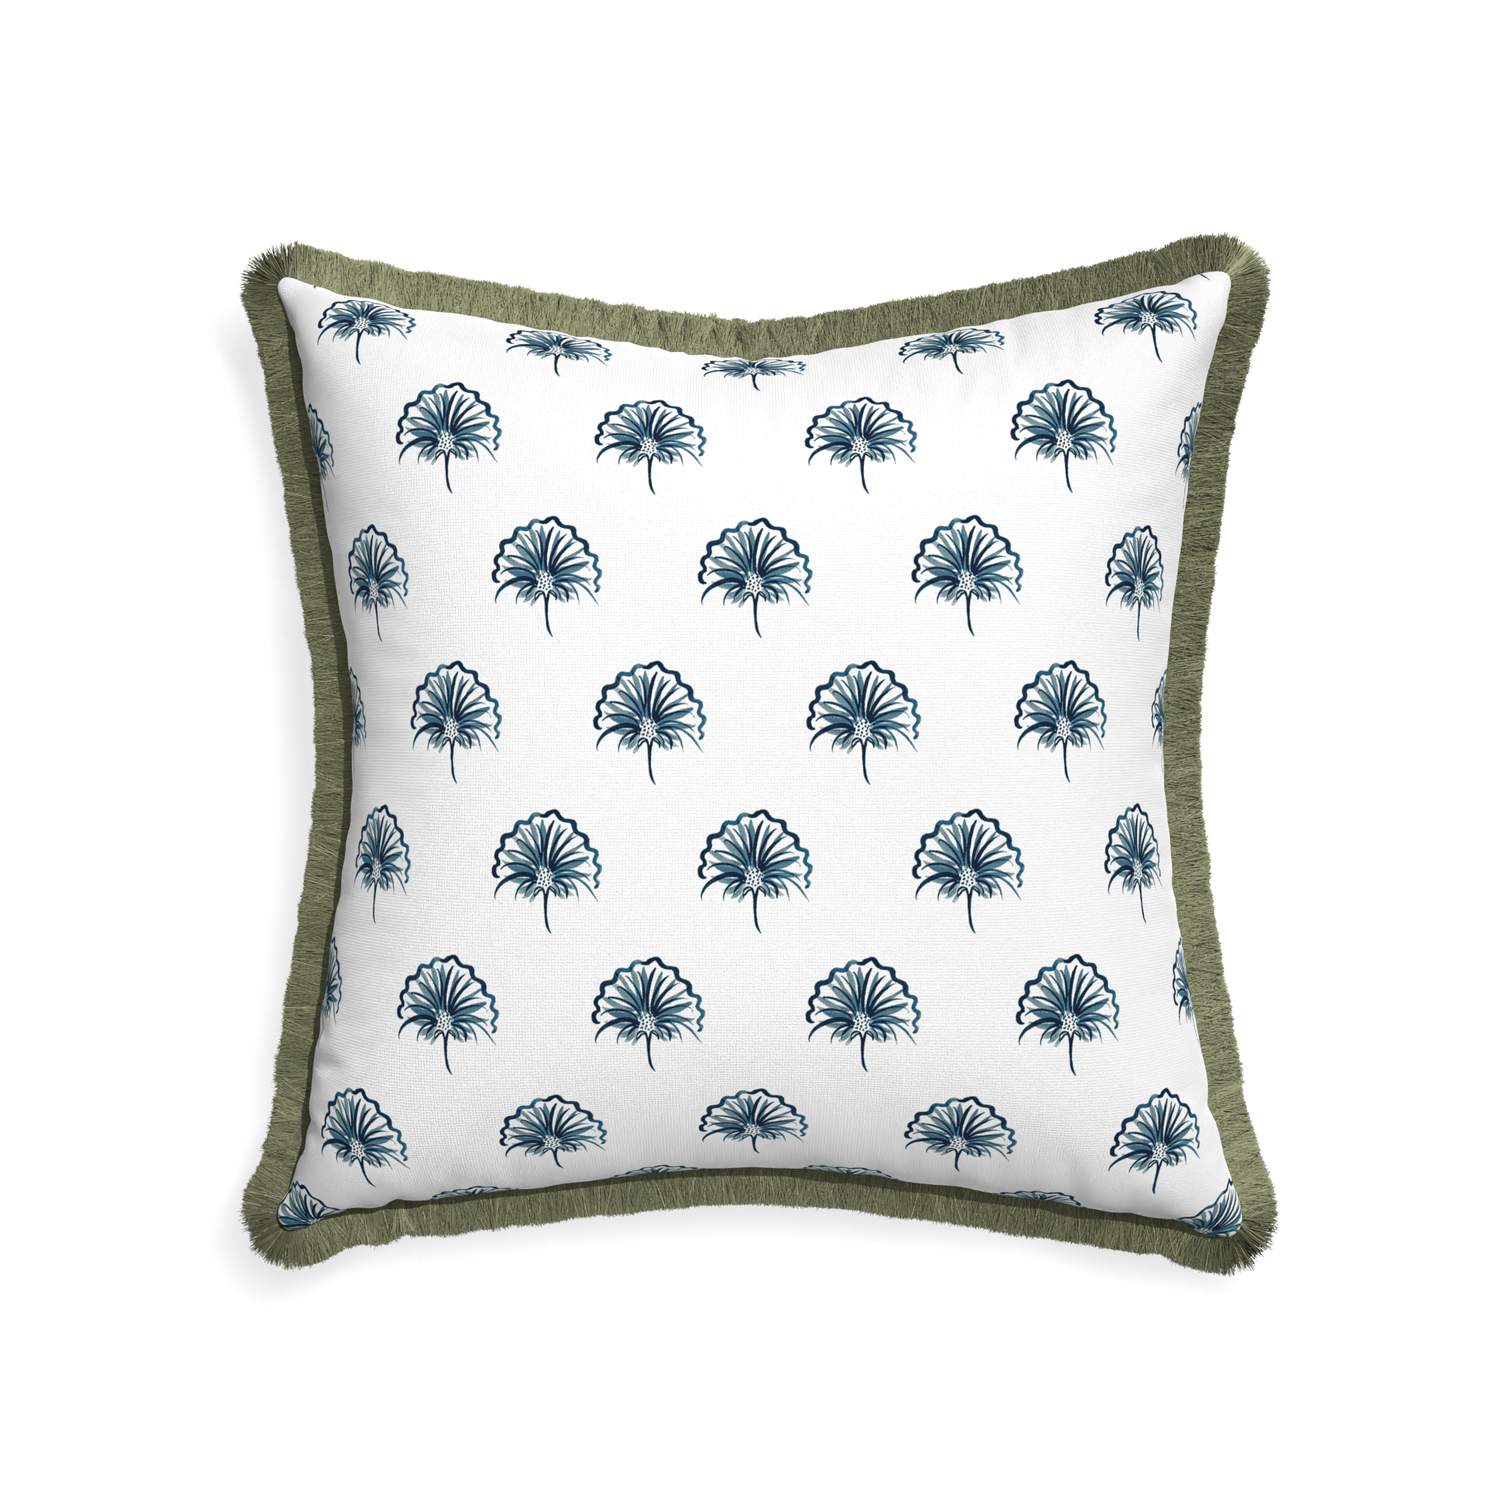 22-square penelope midnight custom floral navypillow with sage fringe on white background